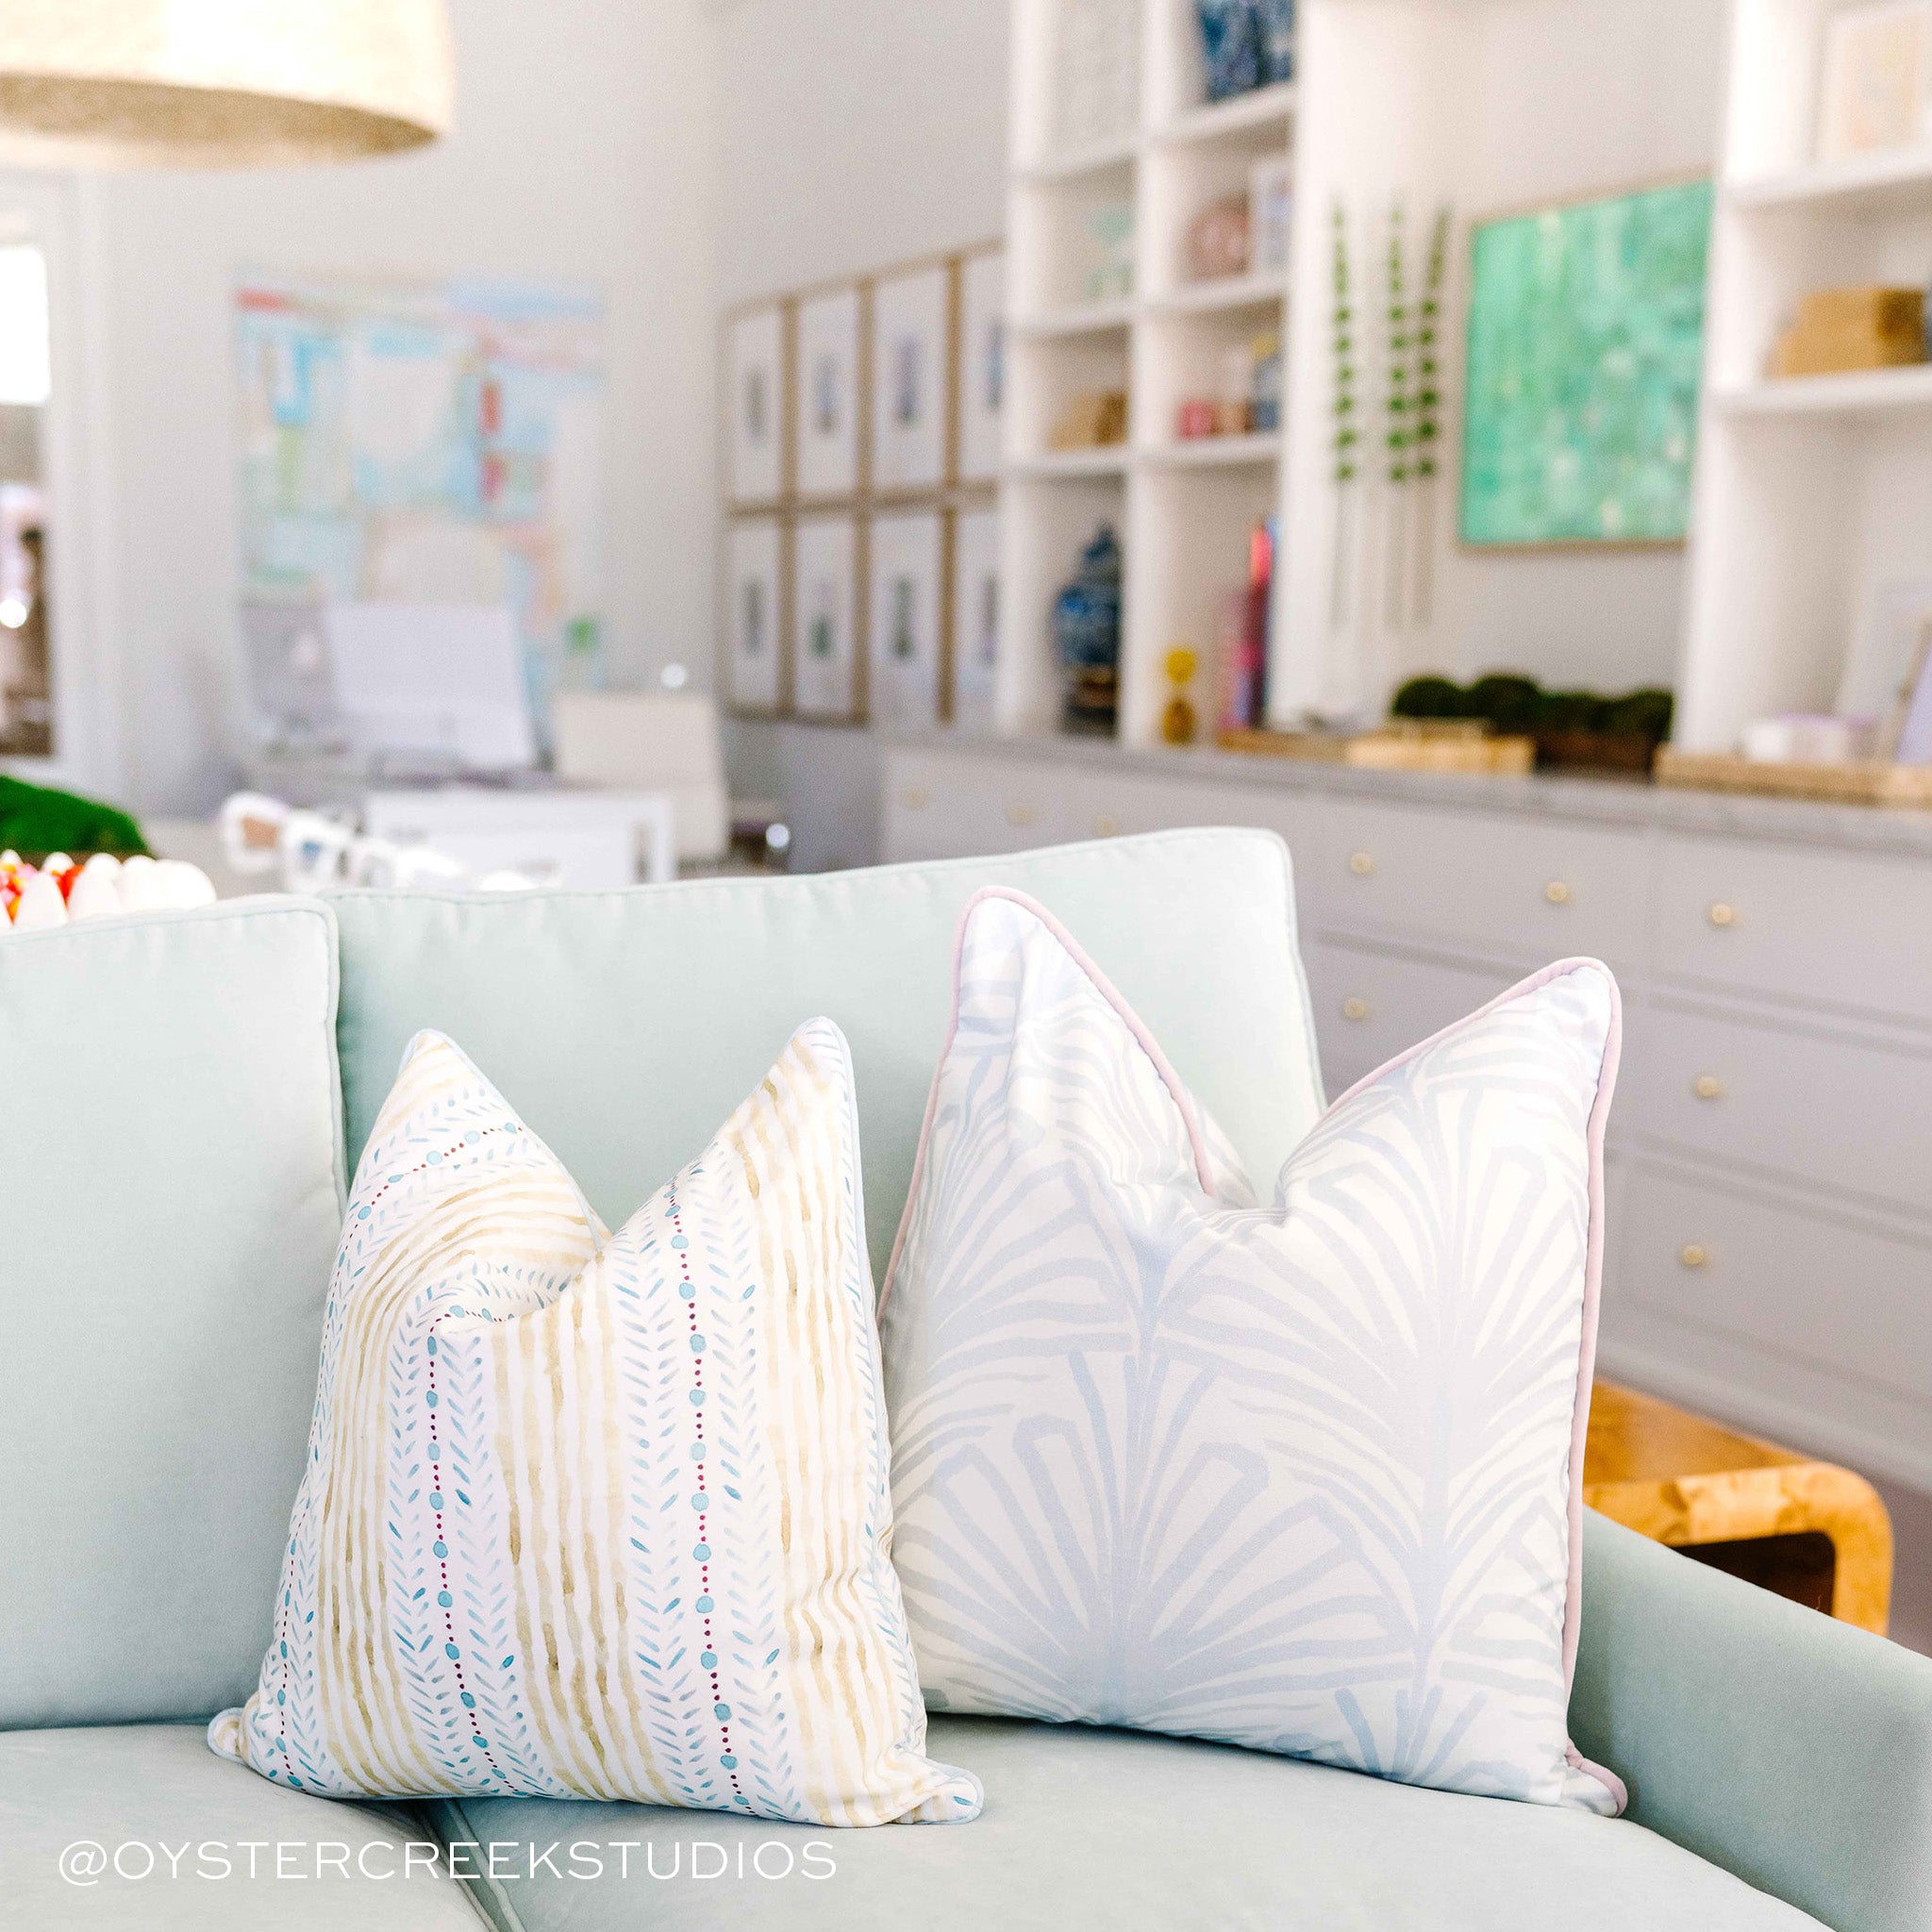 Couch Close-up with Blue & Green Striped Printed Pillow and Sky Blue Palm Printed Pillow. Photo taken by Oyster Creek Studios